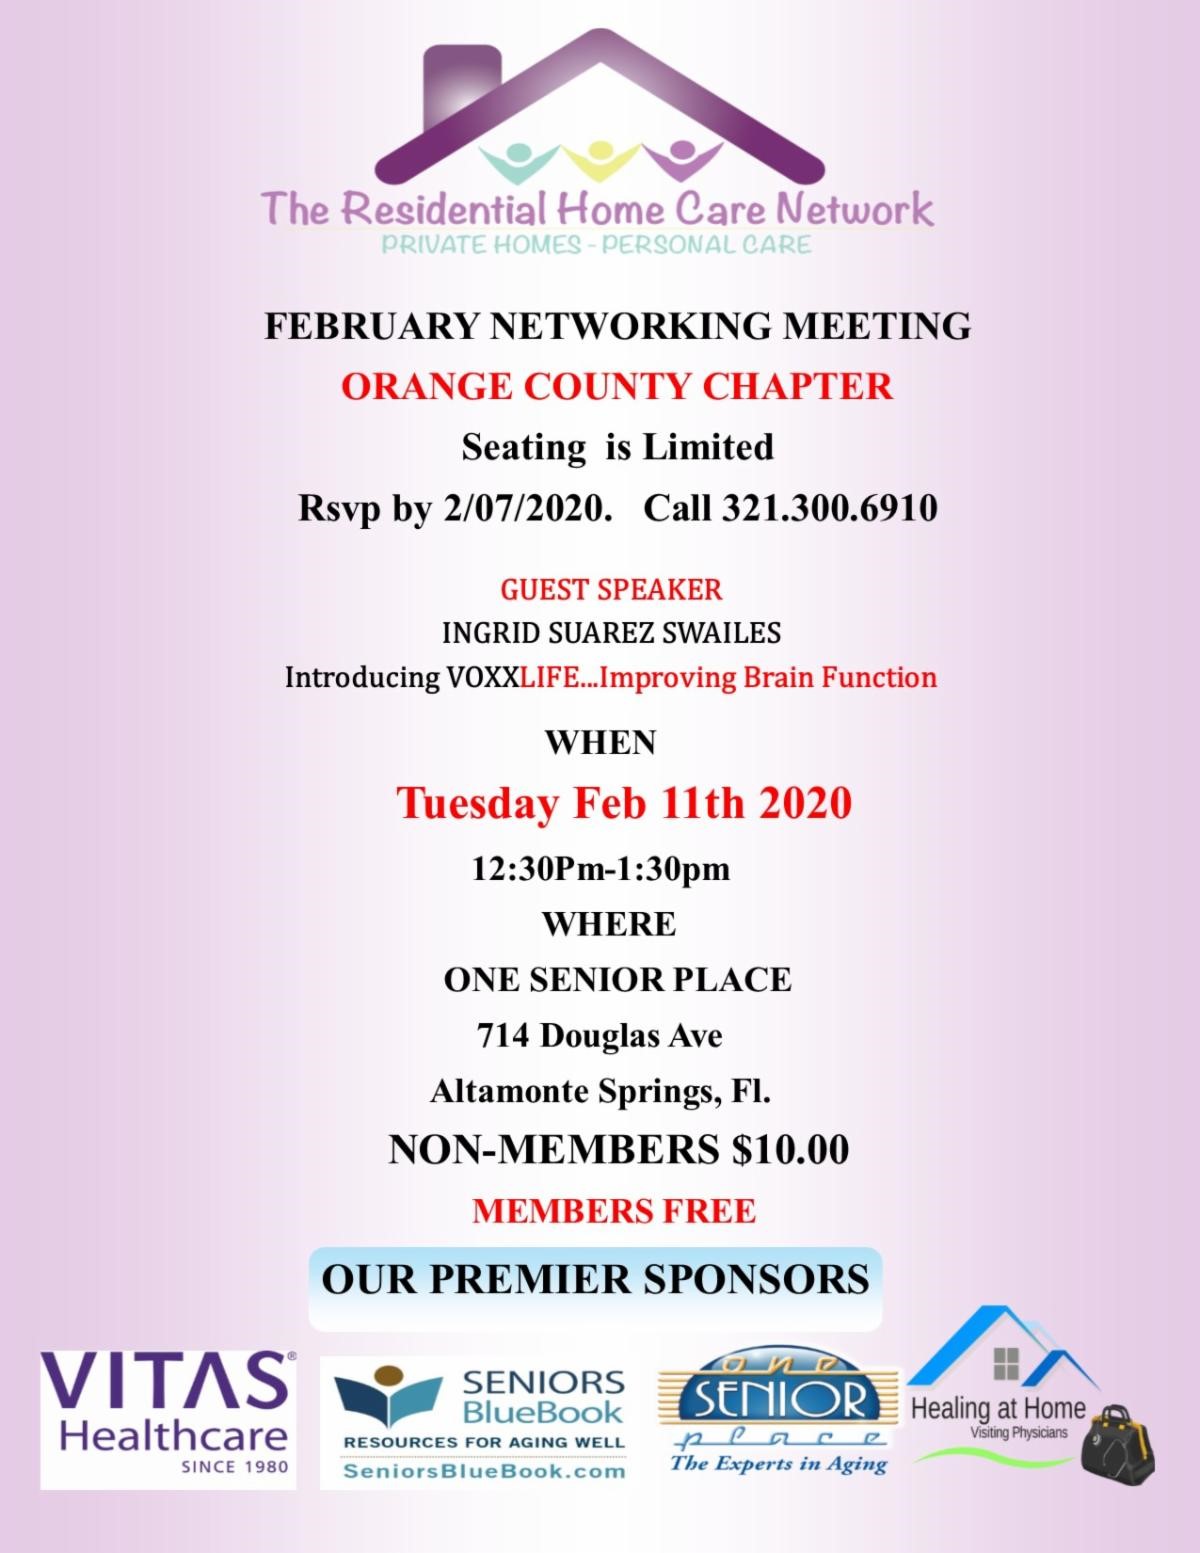 The Residential Home Care Network - Orange County Chapter Meeting